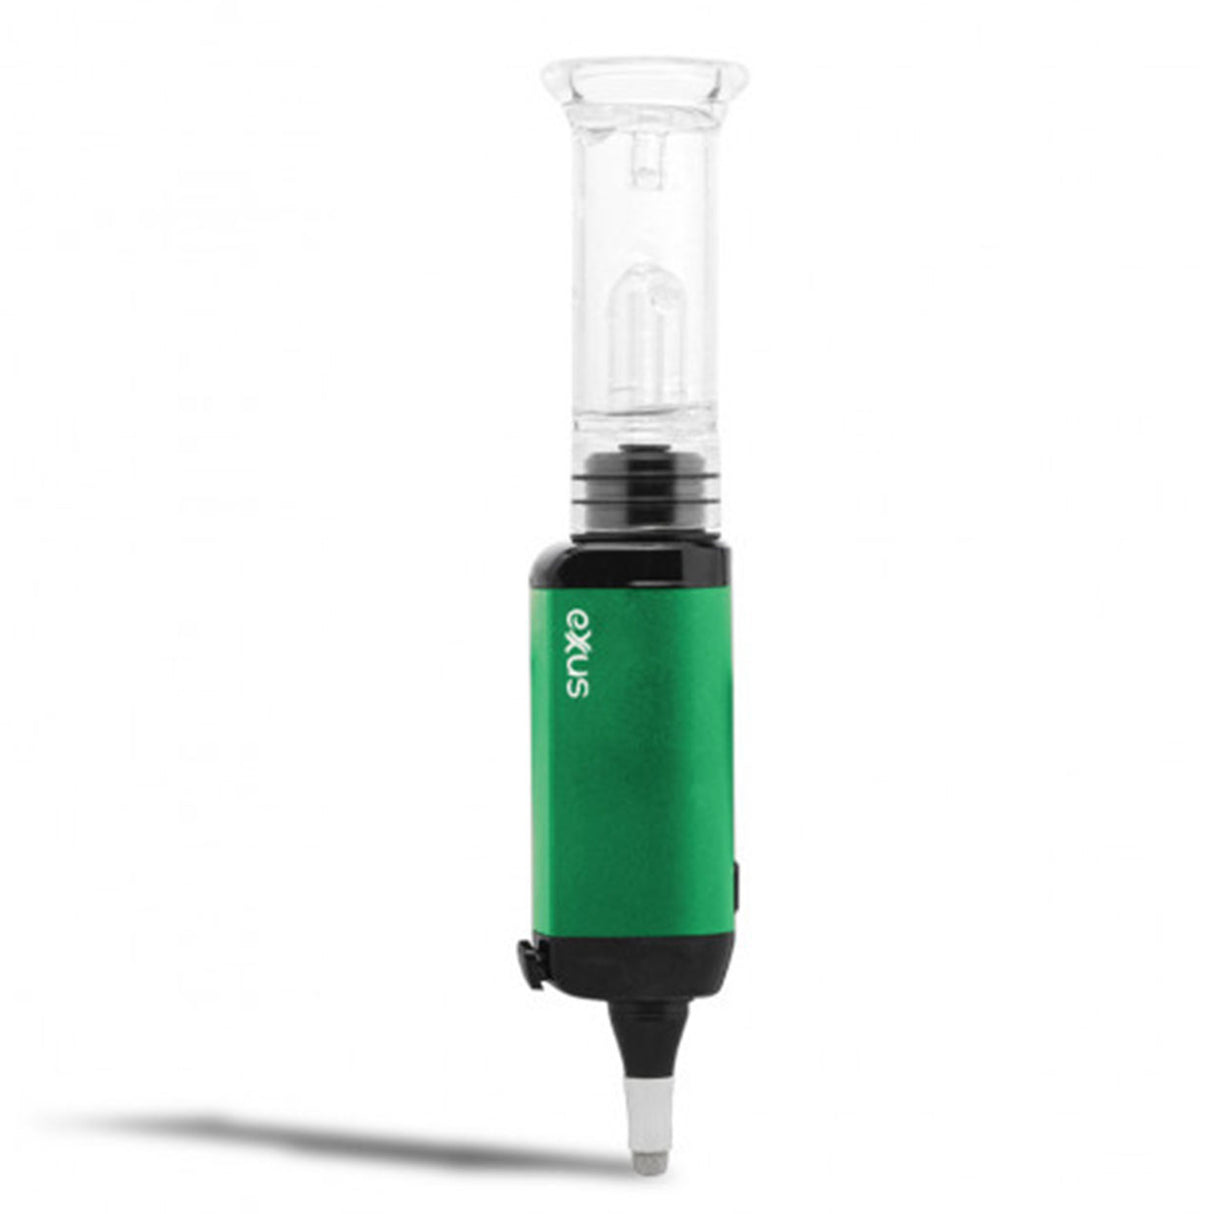 Green Exxus VRS Vaporizer Kit with Nectar Collector Mode, Dab Rig Mode, Cartridge Mode Comes with carrying pouch 4